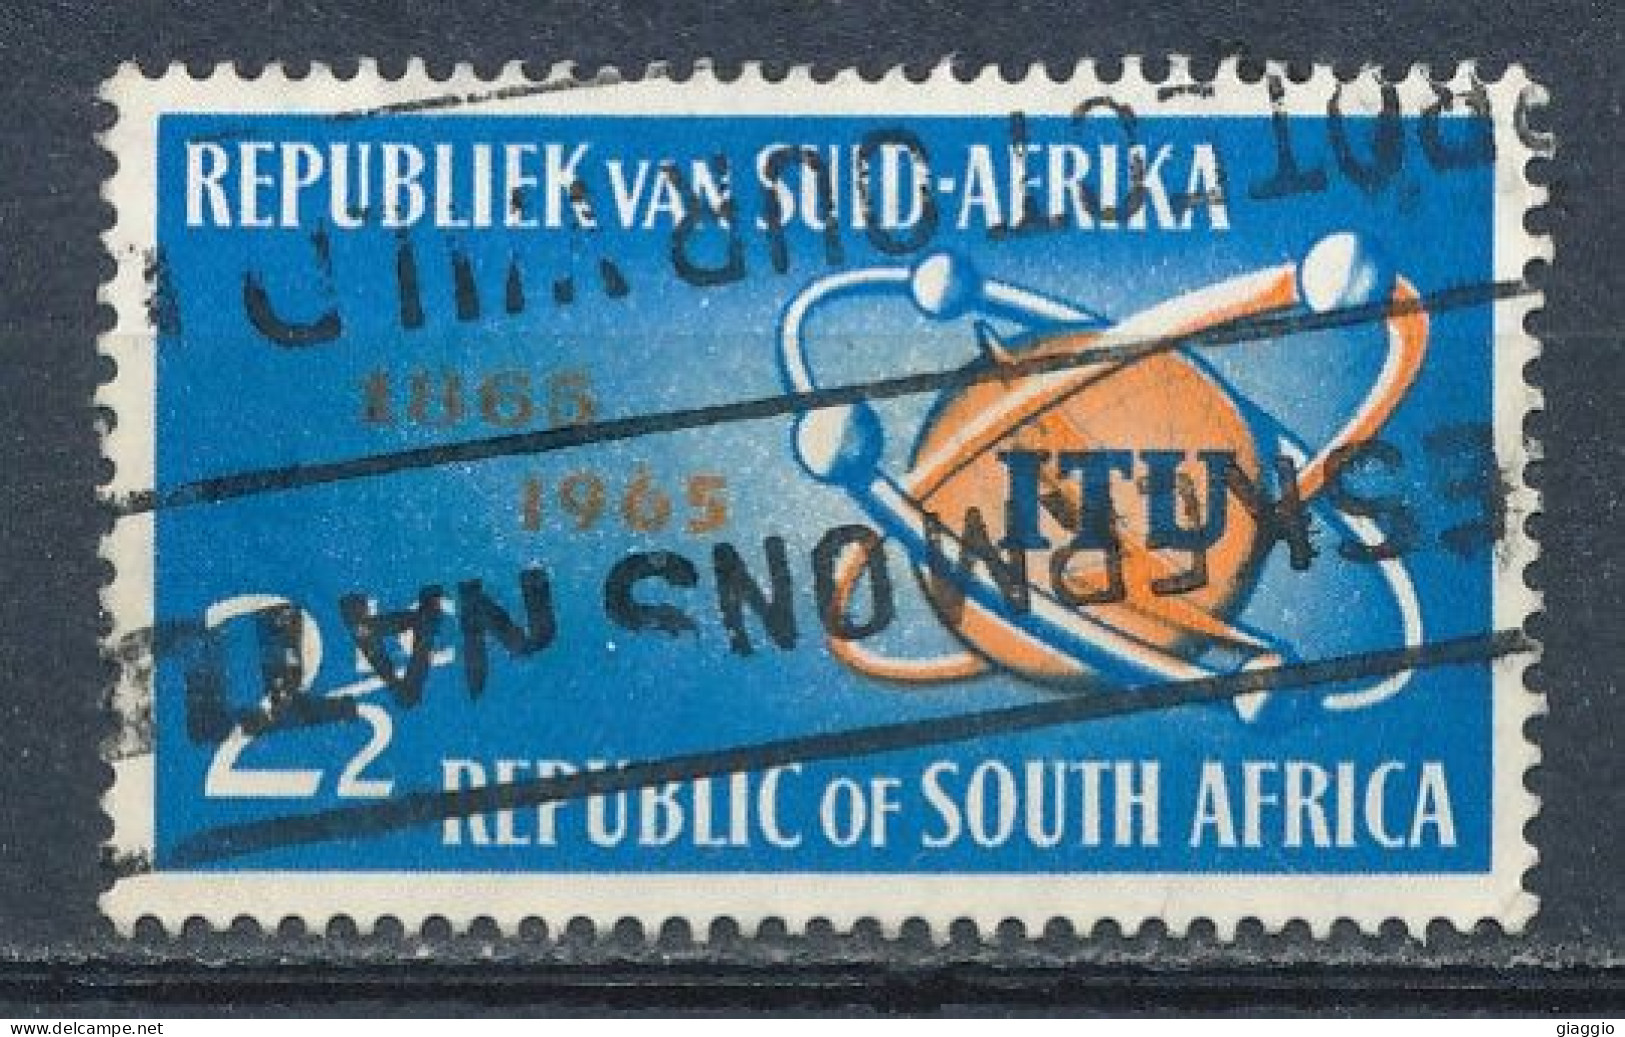 °°° SOUTH AFRICA  - Y&T N°294 - 1965 °°° - Used Stamps